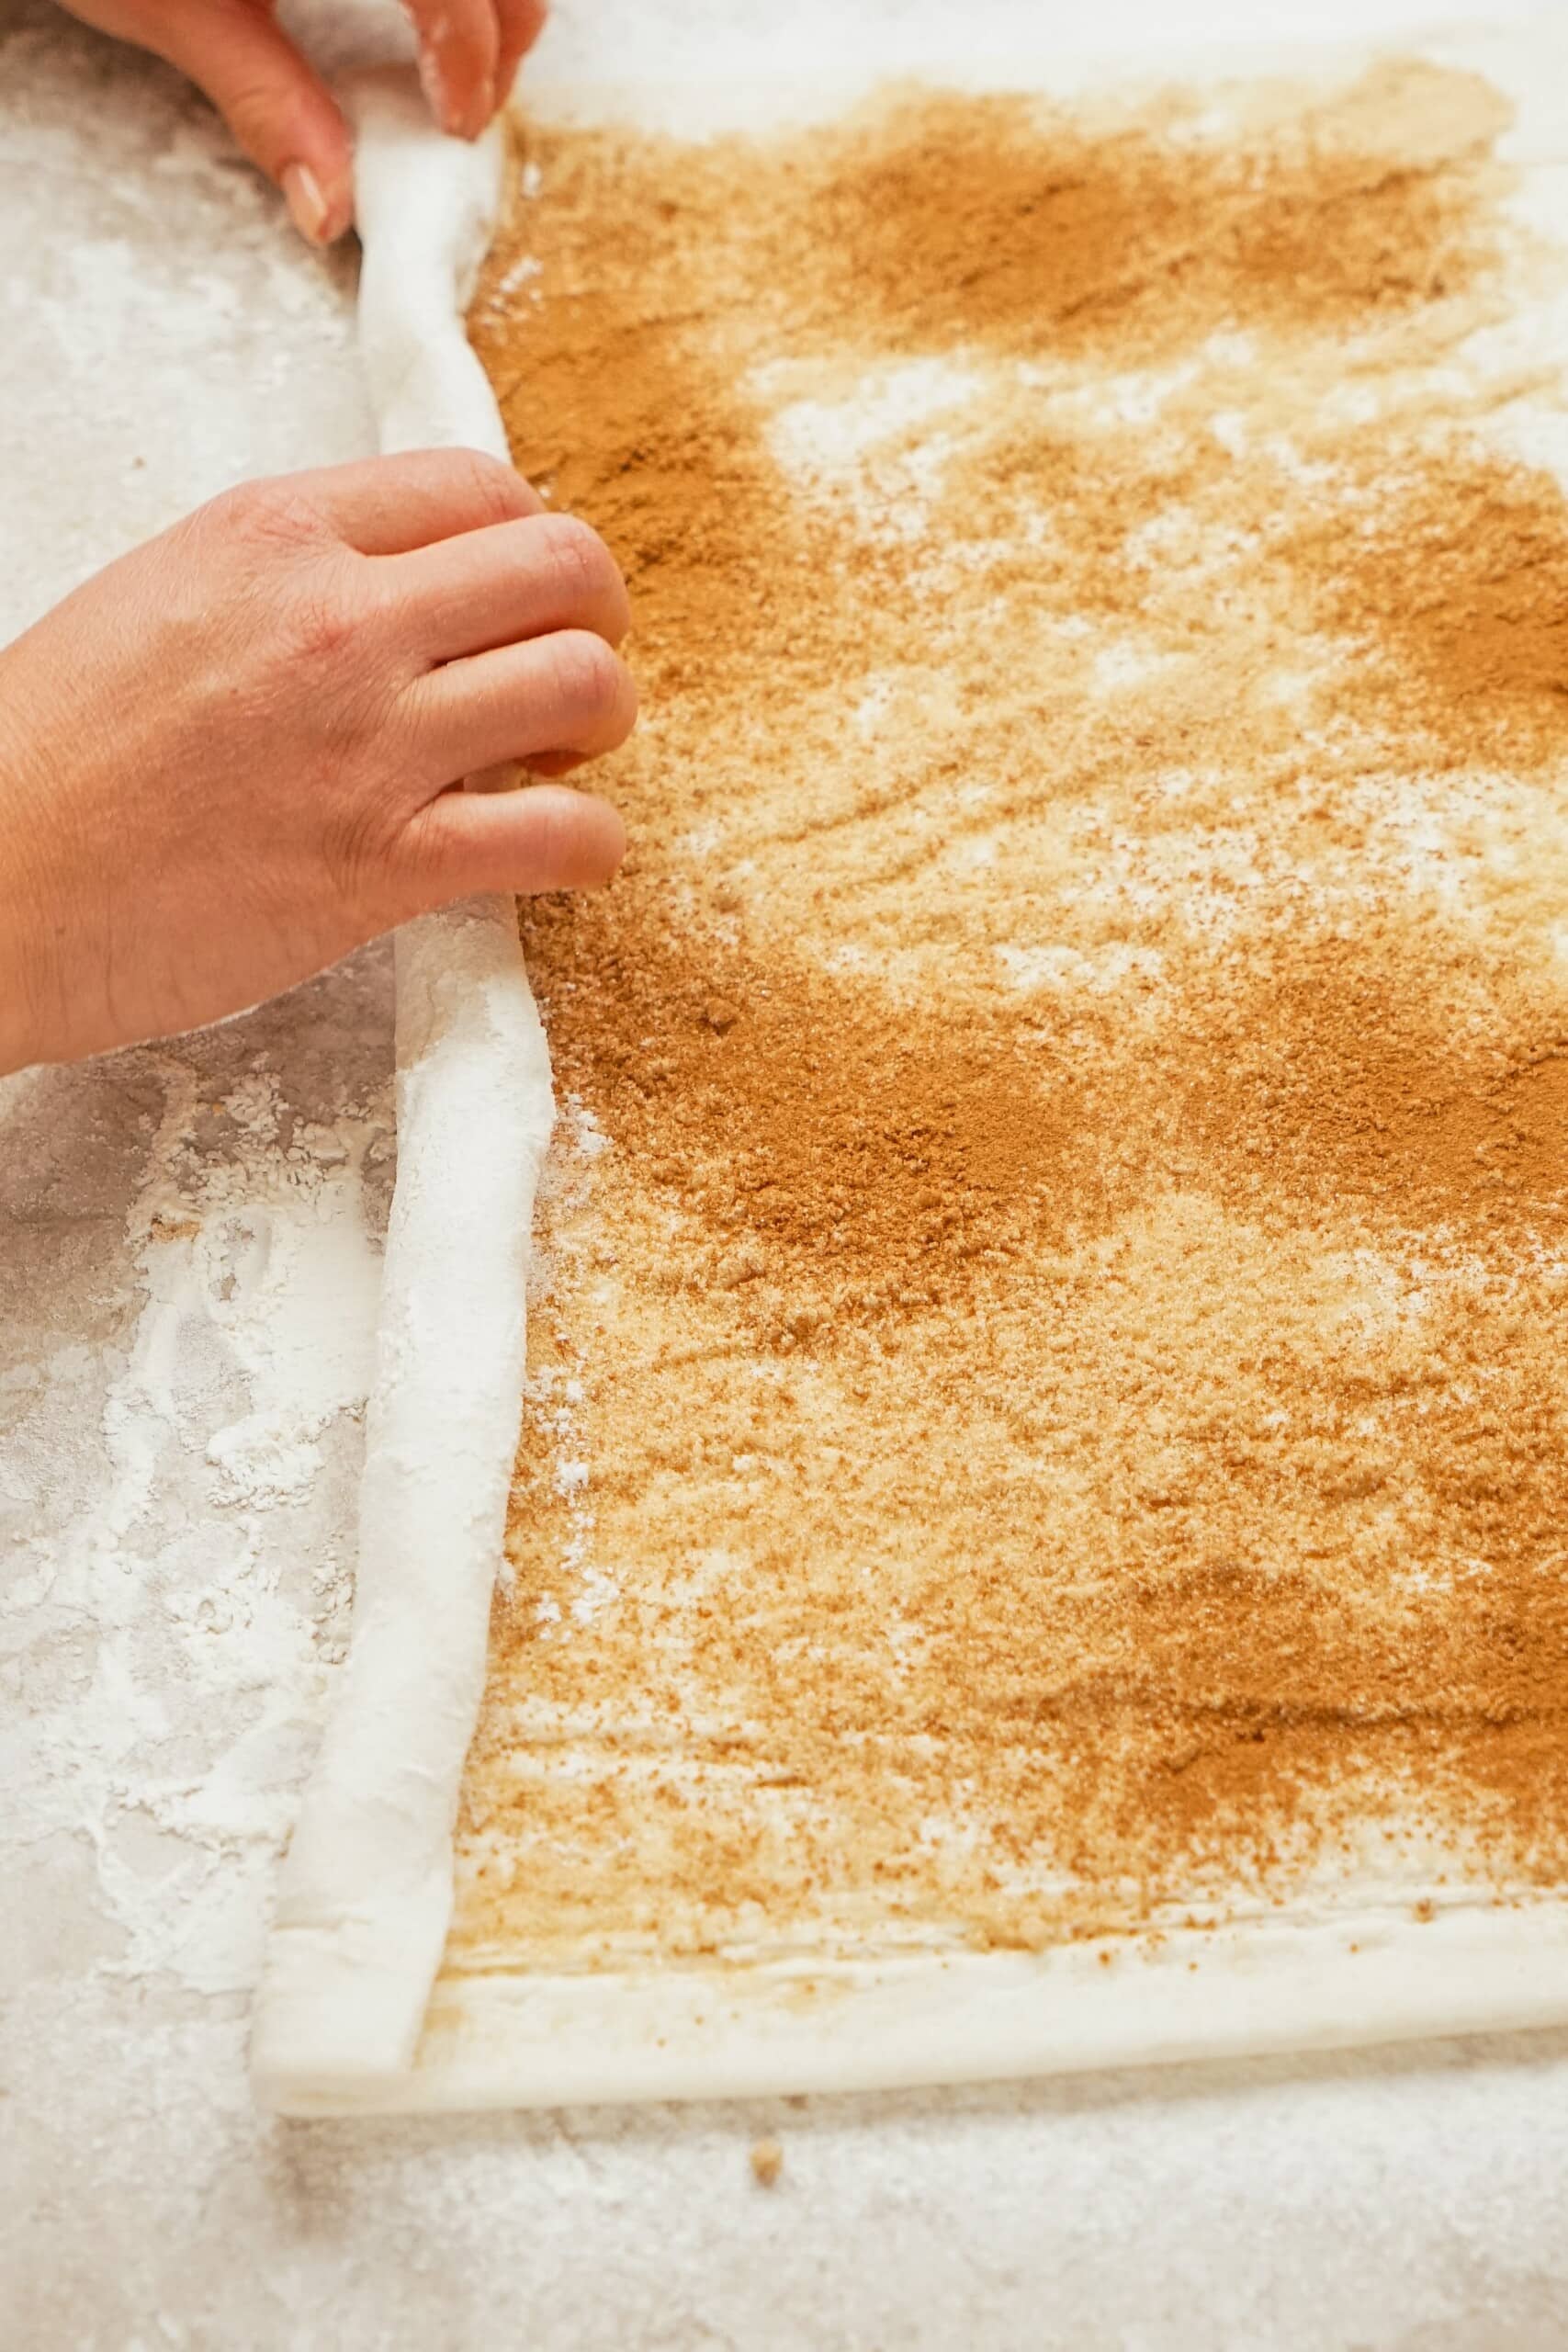 Woman's hand rolling Puff Pastry sheet with brown sugar and cinnamon mixture